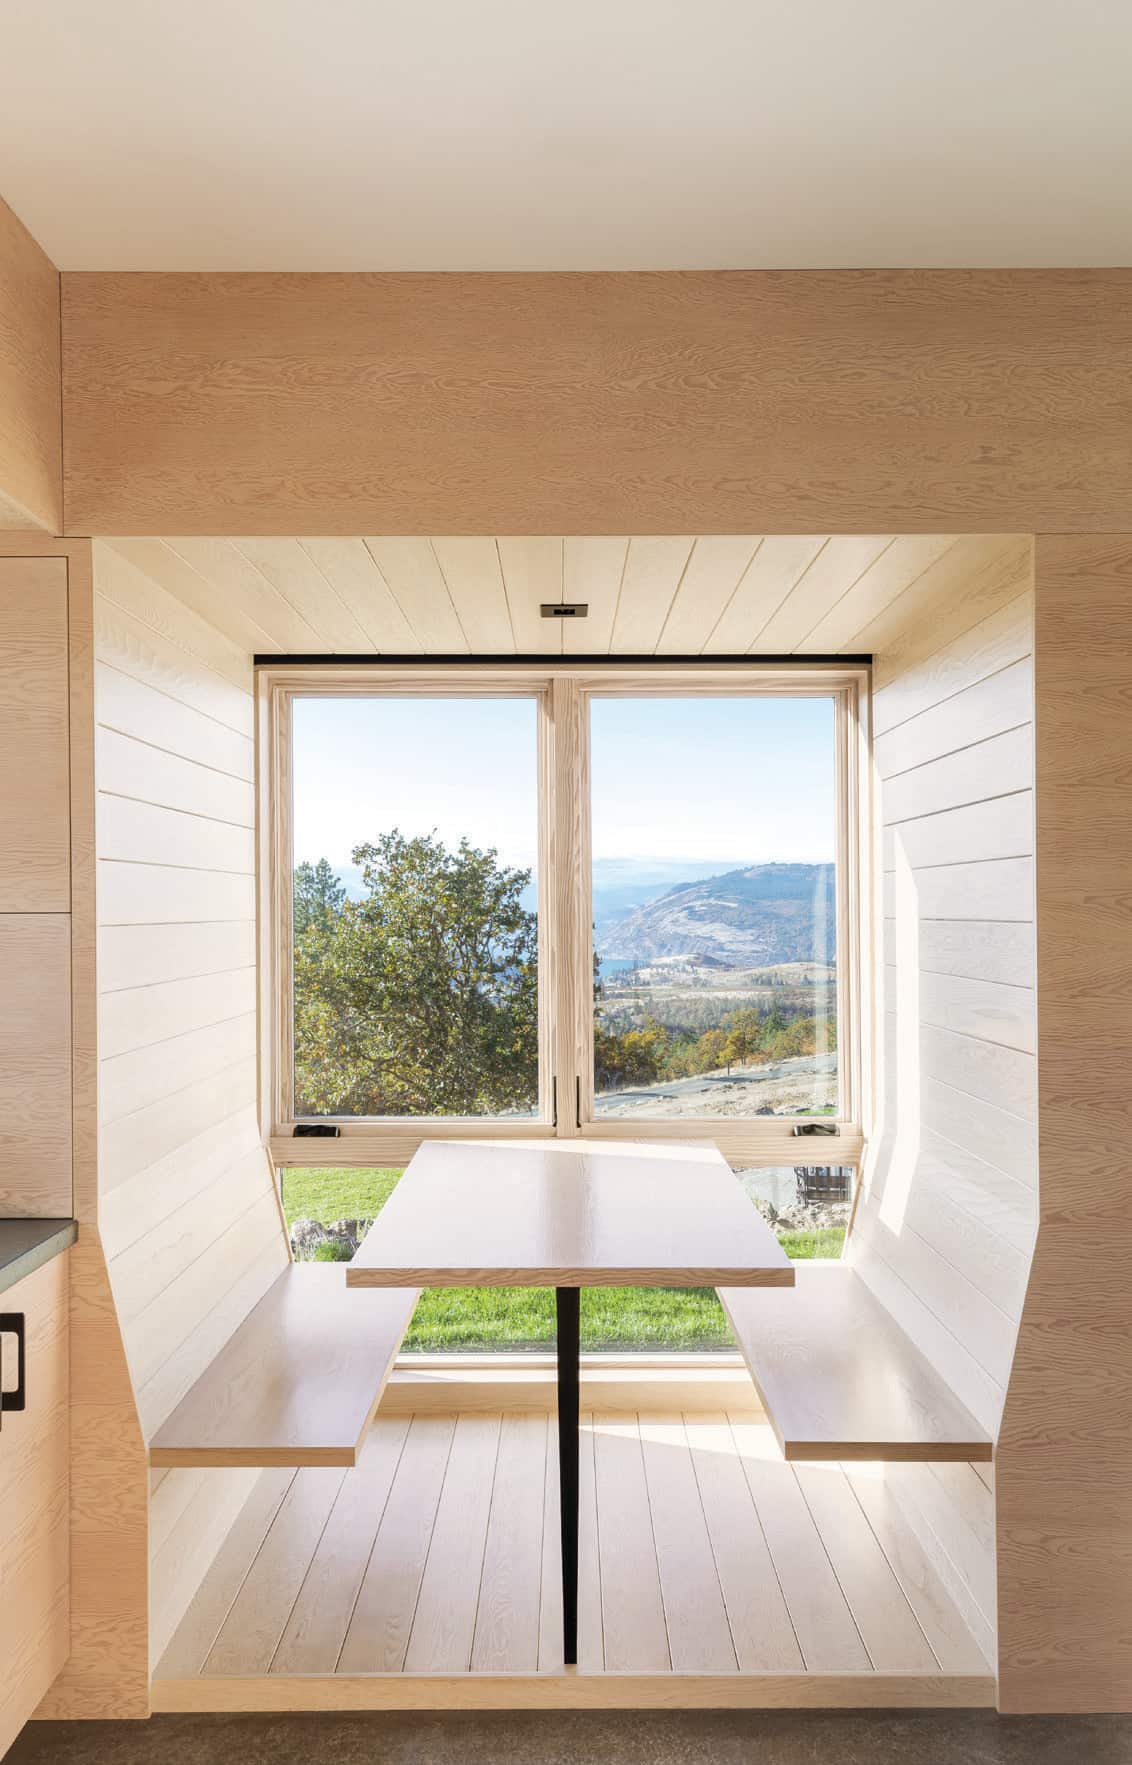 The kitchen nook with floating benches and sweeping views makes for intriguing meals.